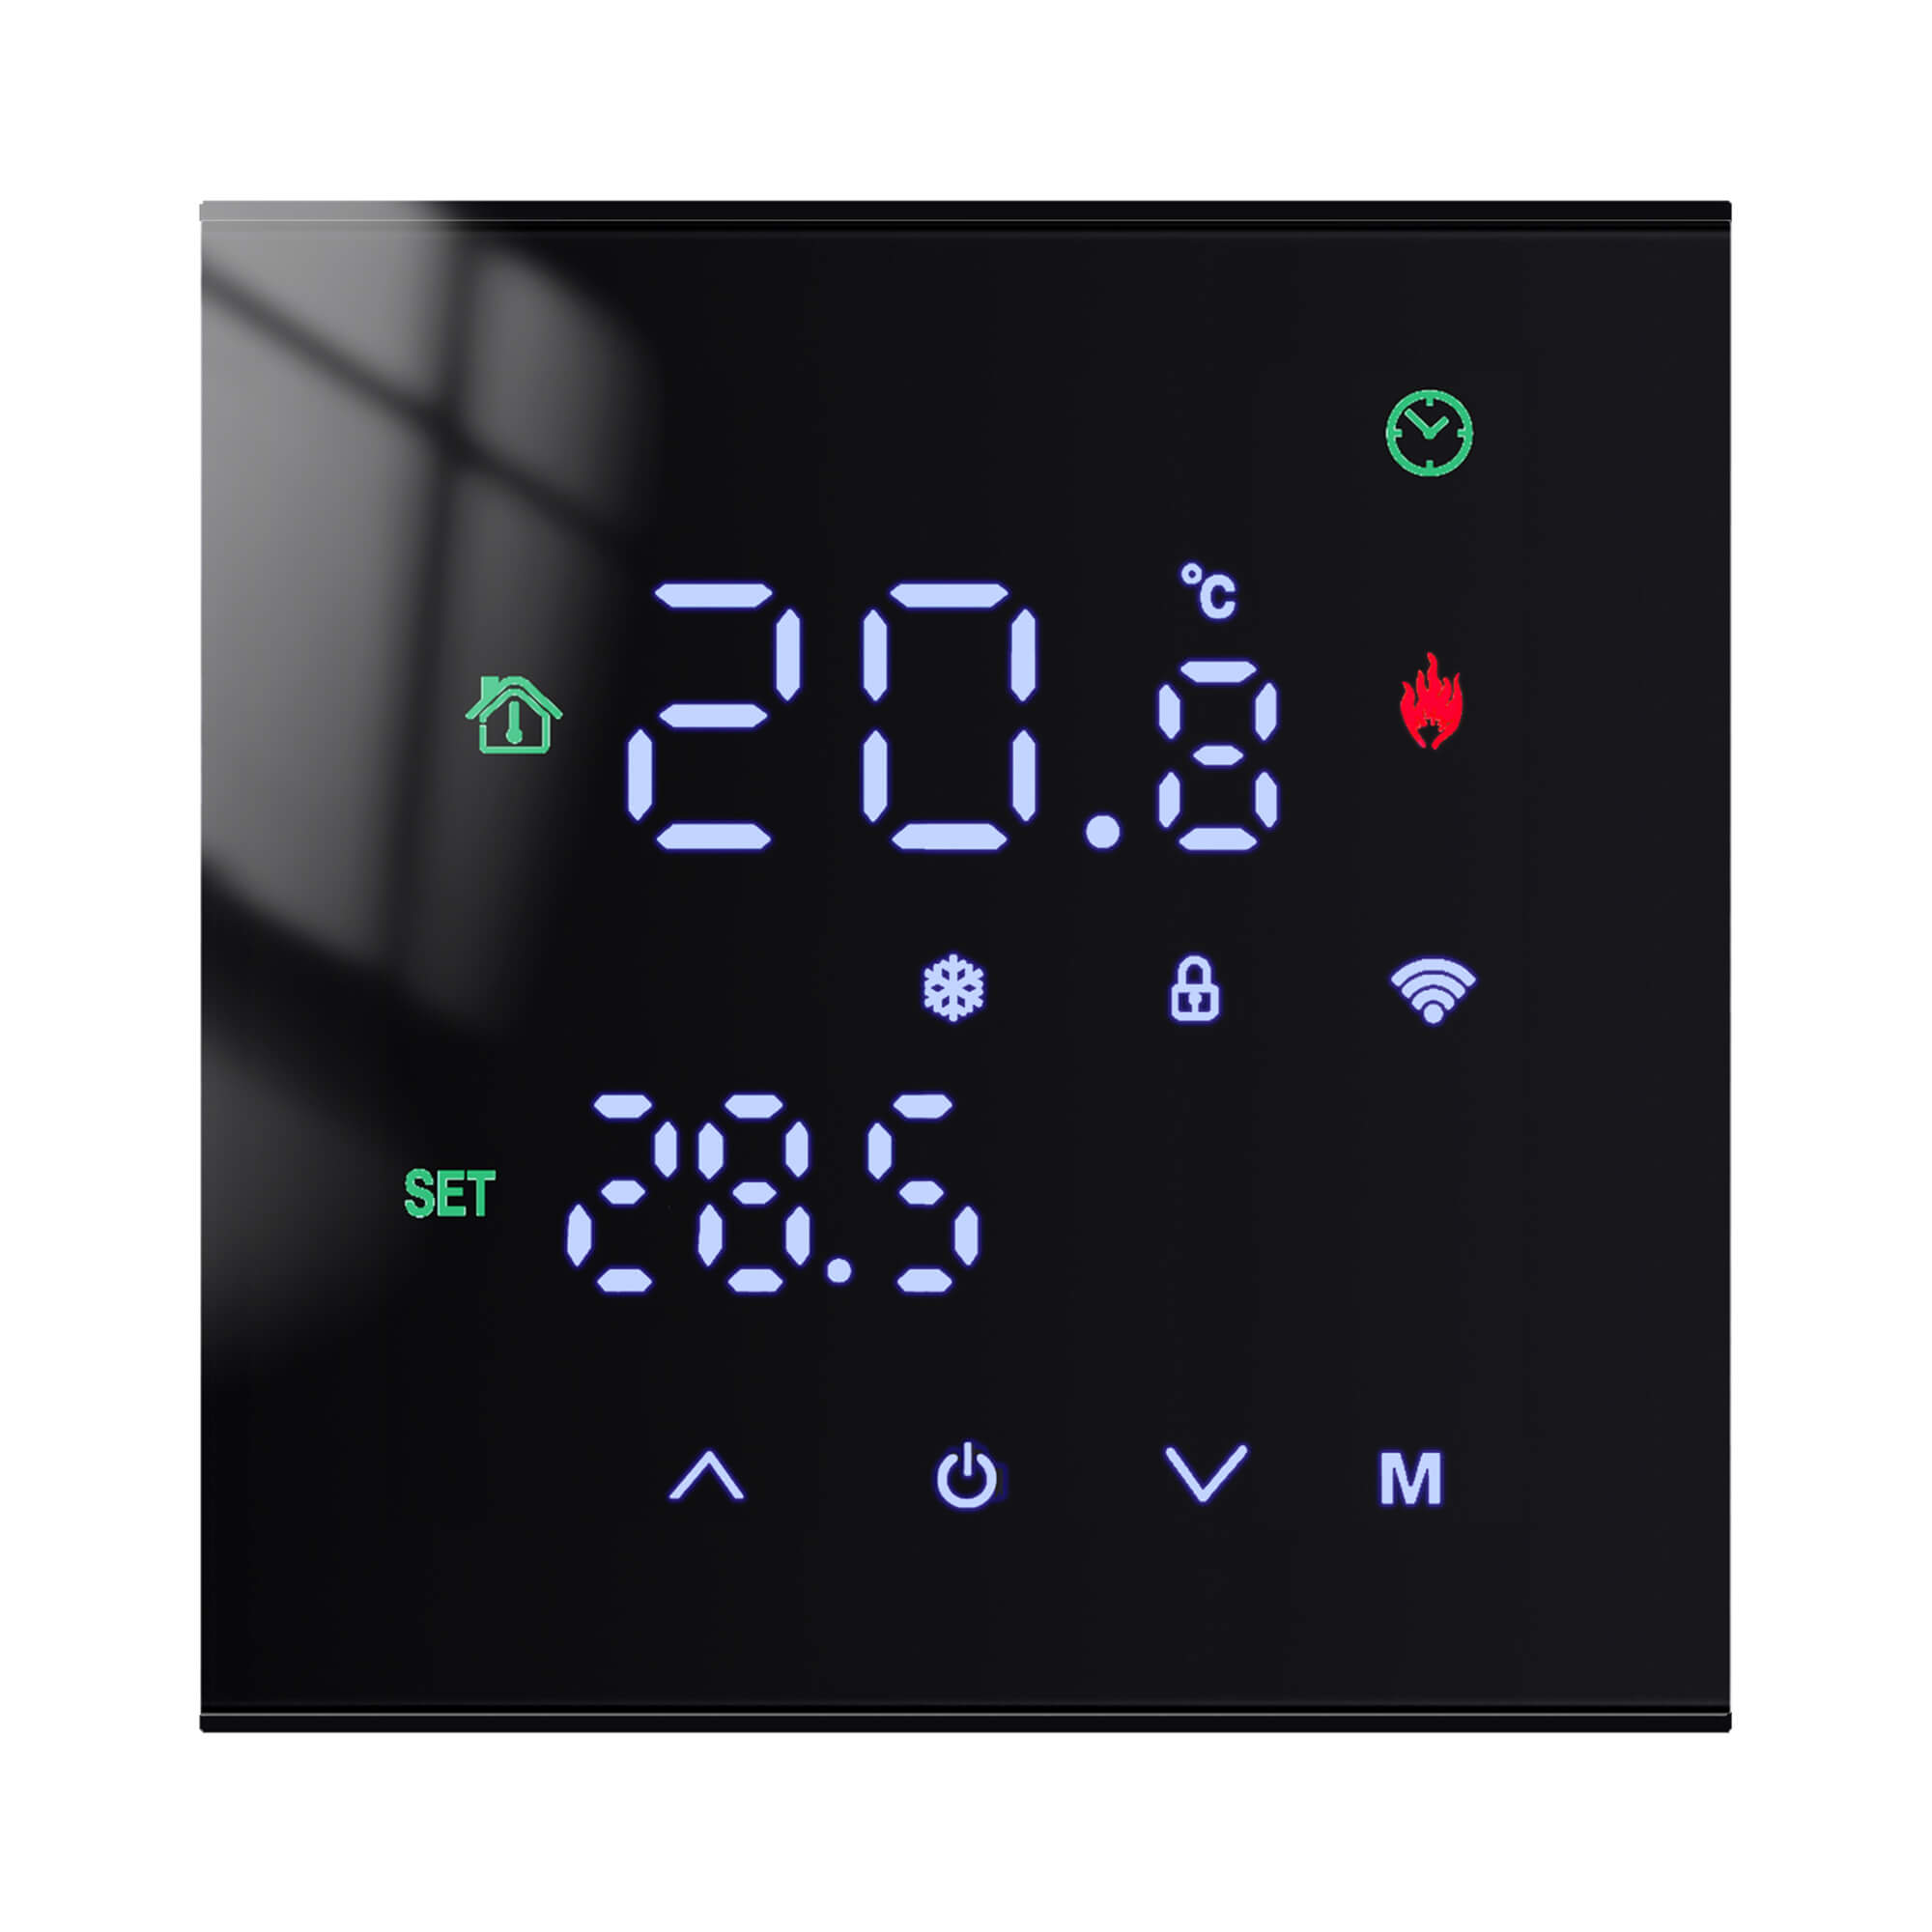 Tuya WiFi Smart Touch Screen Thermostat Electric Floor Heating Water/Gas Boiler Temperature Controller